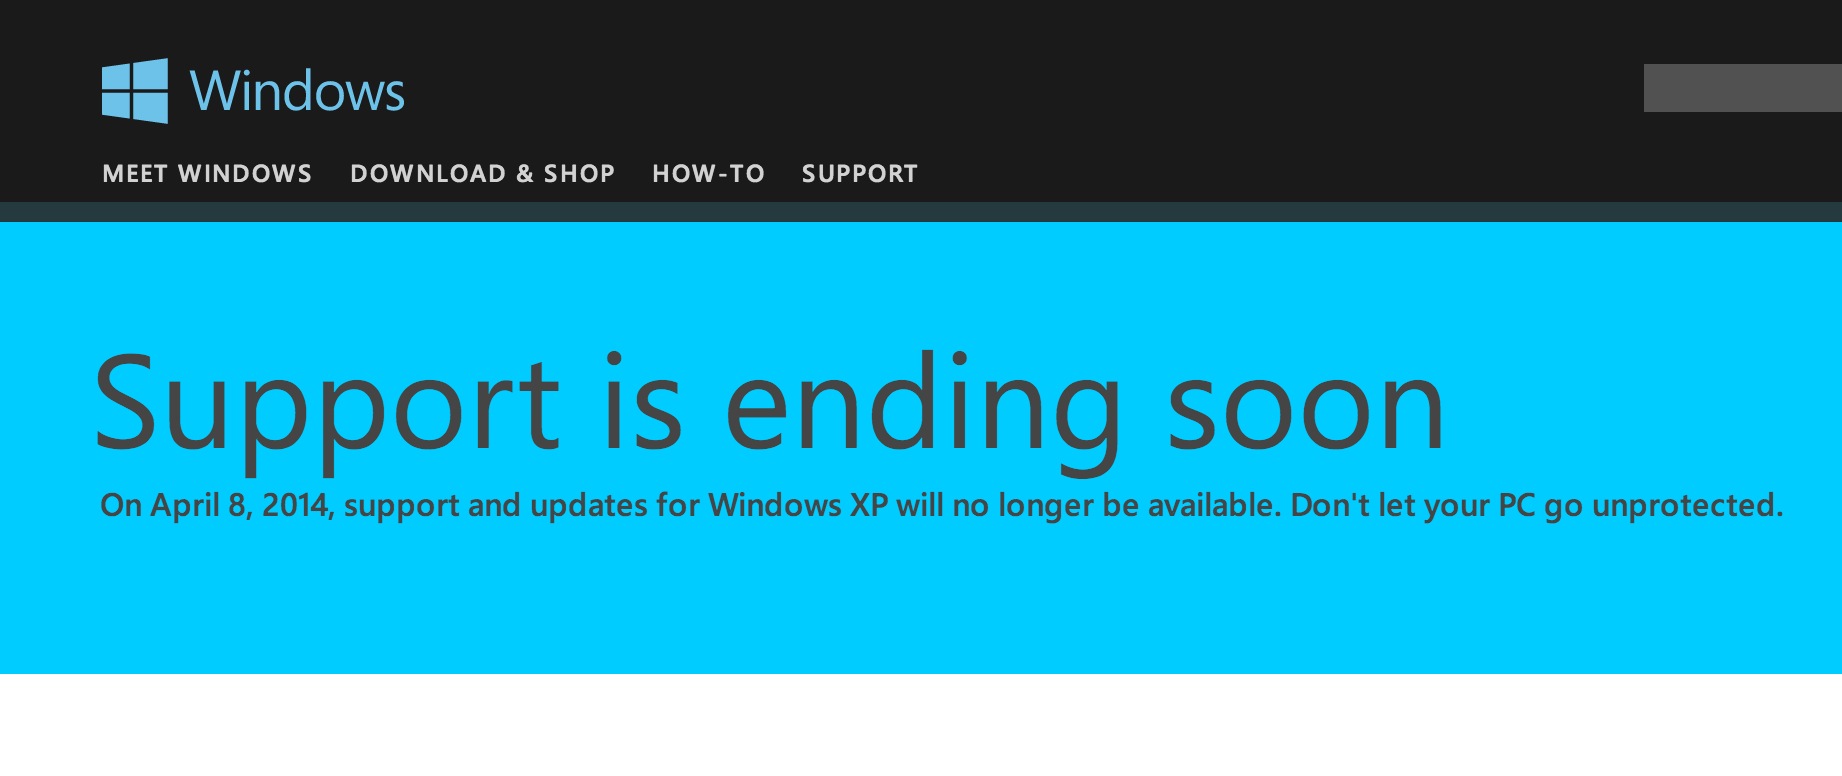 End of support. АСМ виндовс. Windows XP end of support 2014. Window meet shop. Windows meeting Space.